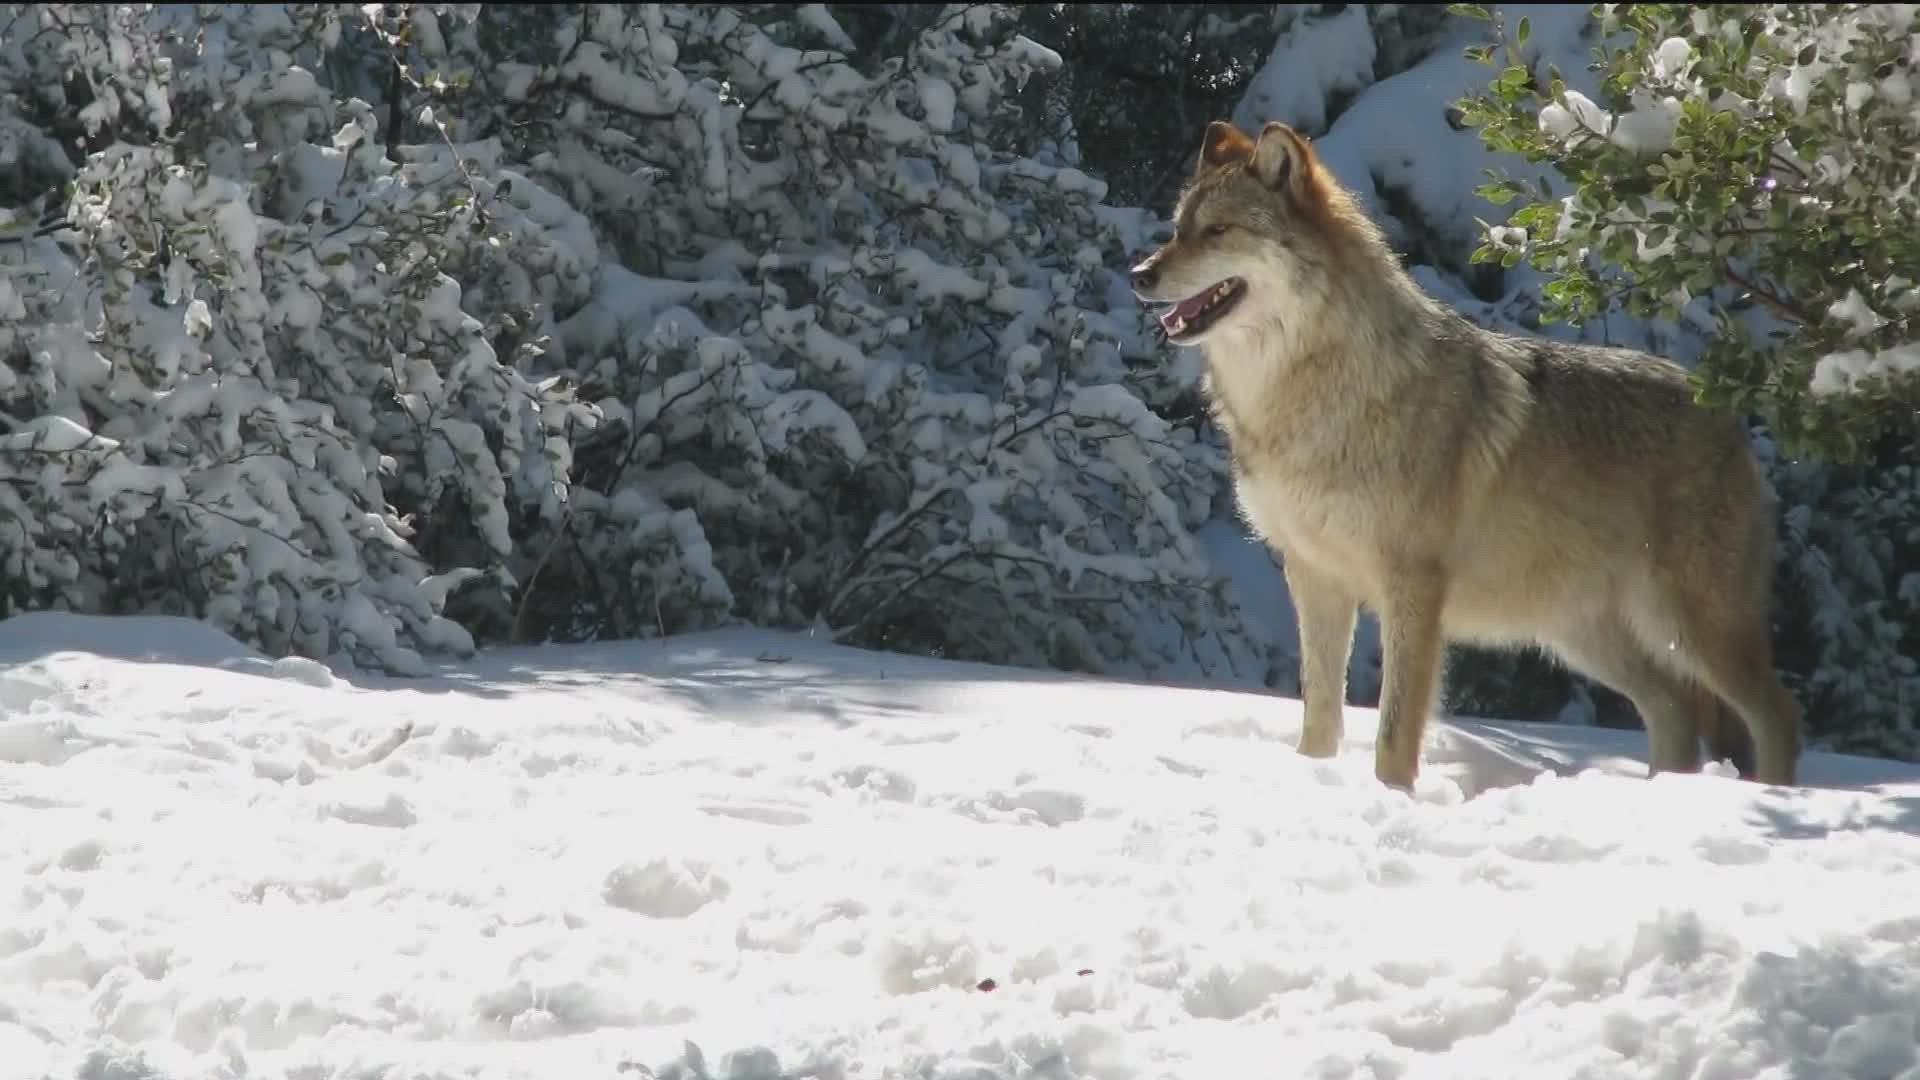 The next time you head to the mountains, feed a Julian apple to a gray wolf!